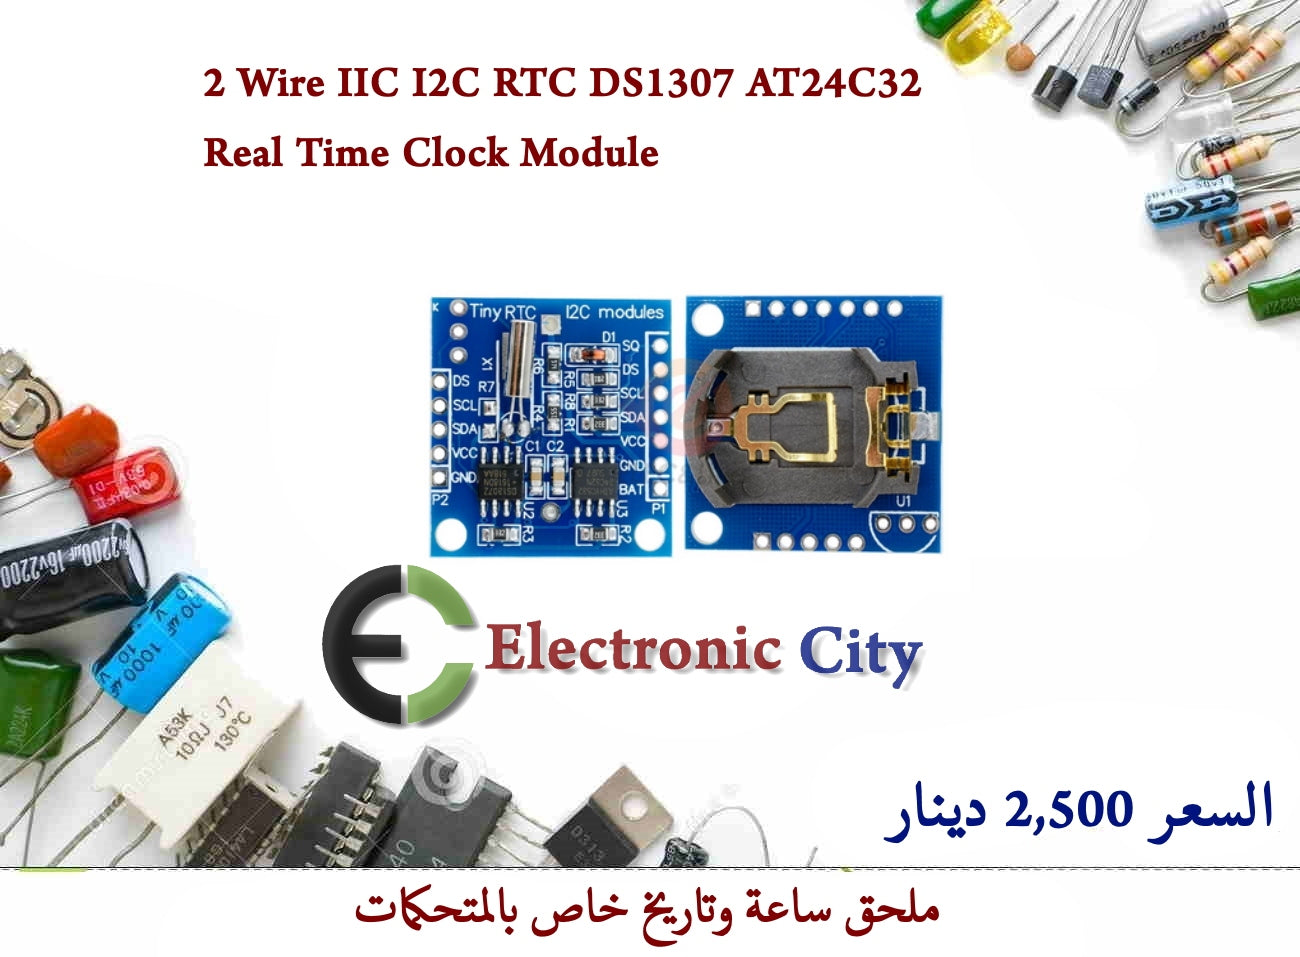 2 Wire IIC I2C RTC DS1307 AT24C32 Real Time Clock Module